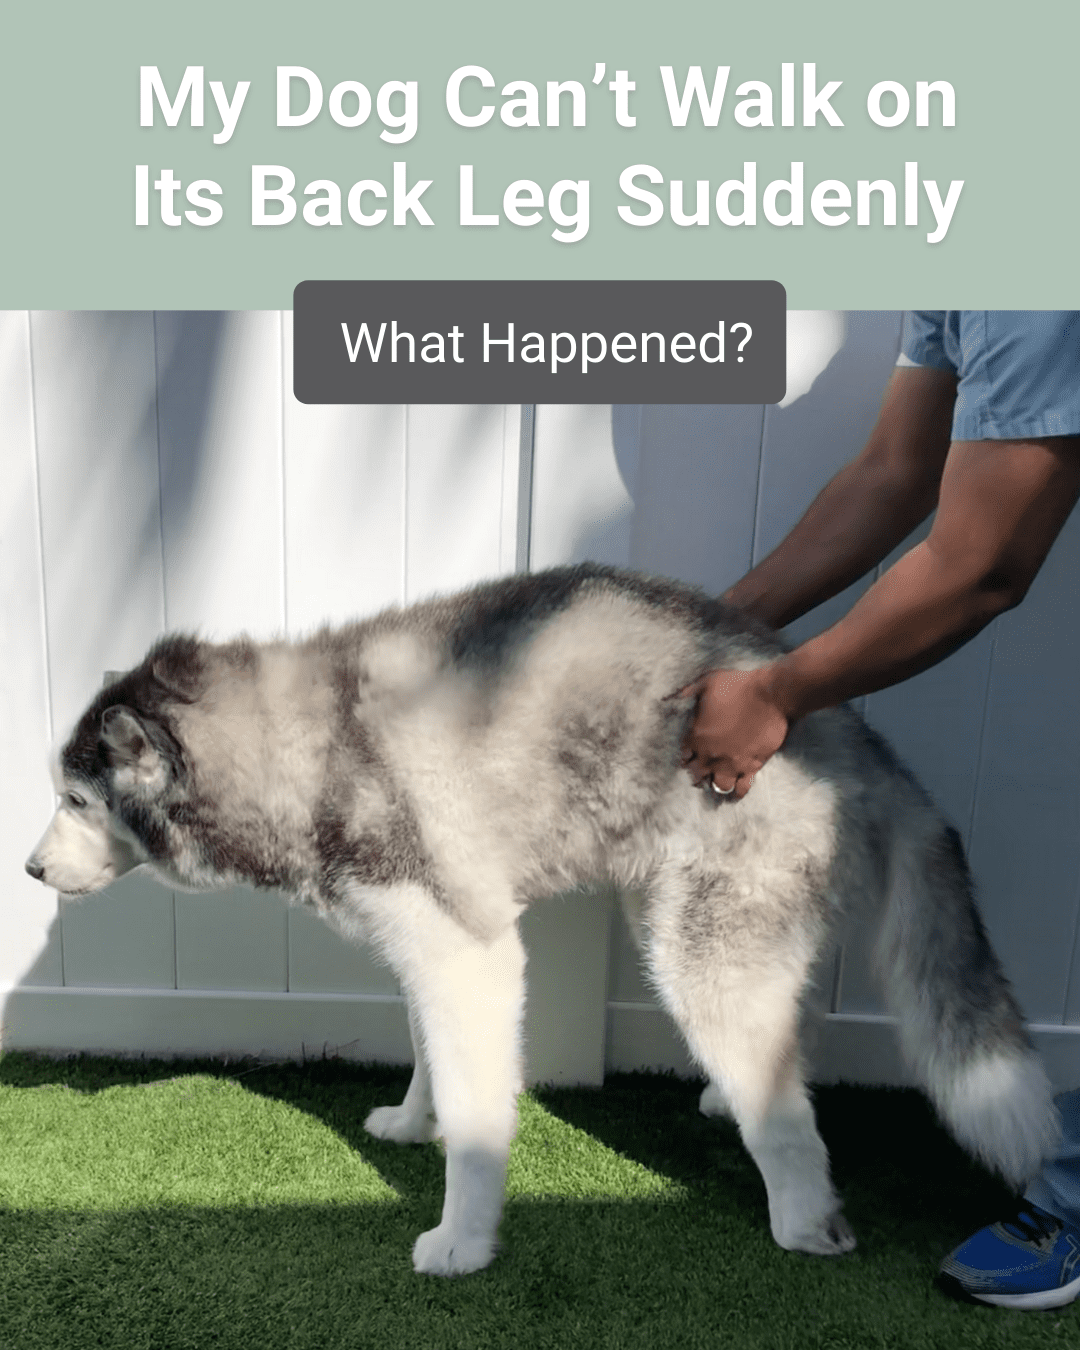 My Dog Can’t Walk on Its Back Leg Suddenly: What Happened?